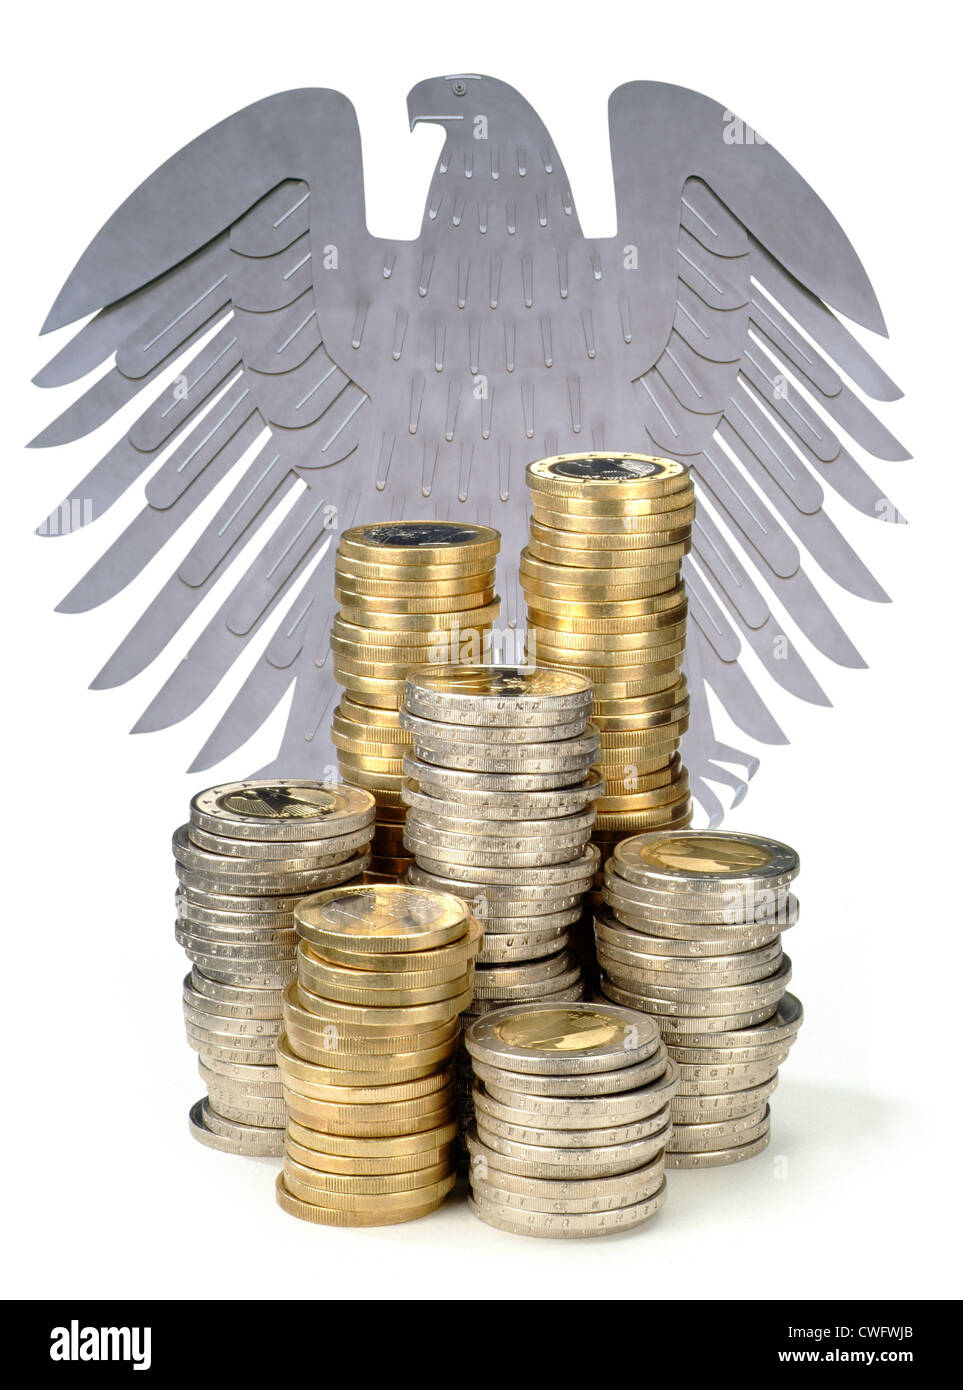 Hamburg, stacking coins in front of the federal eagle Stock Photo